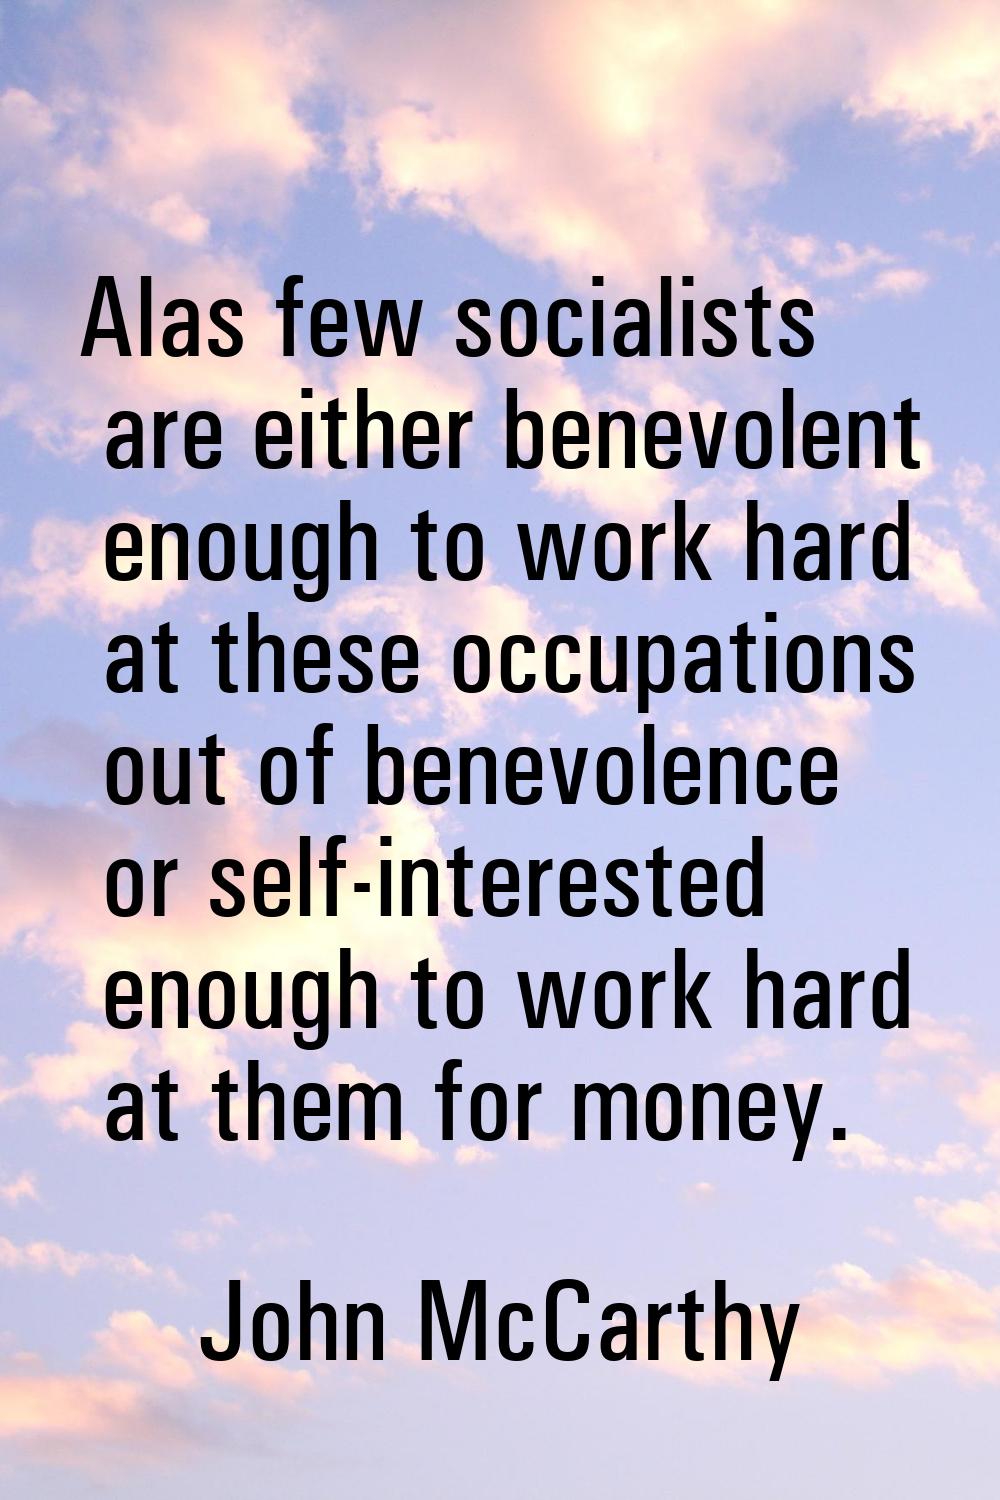 Alas few socialists are either benevolent enough to work hard at these occupations out of benevolen